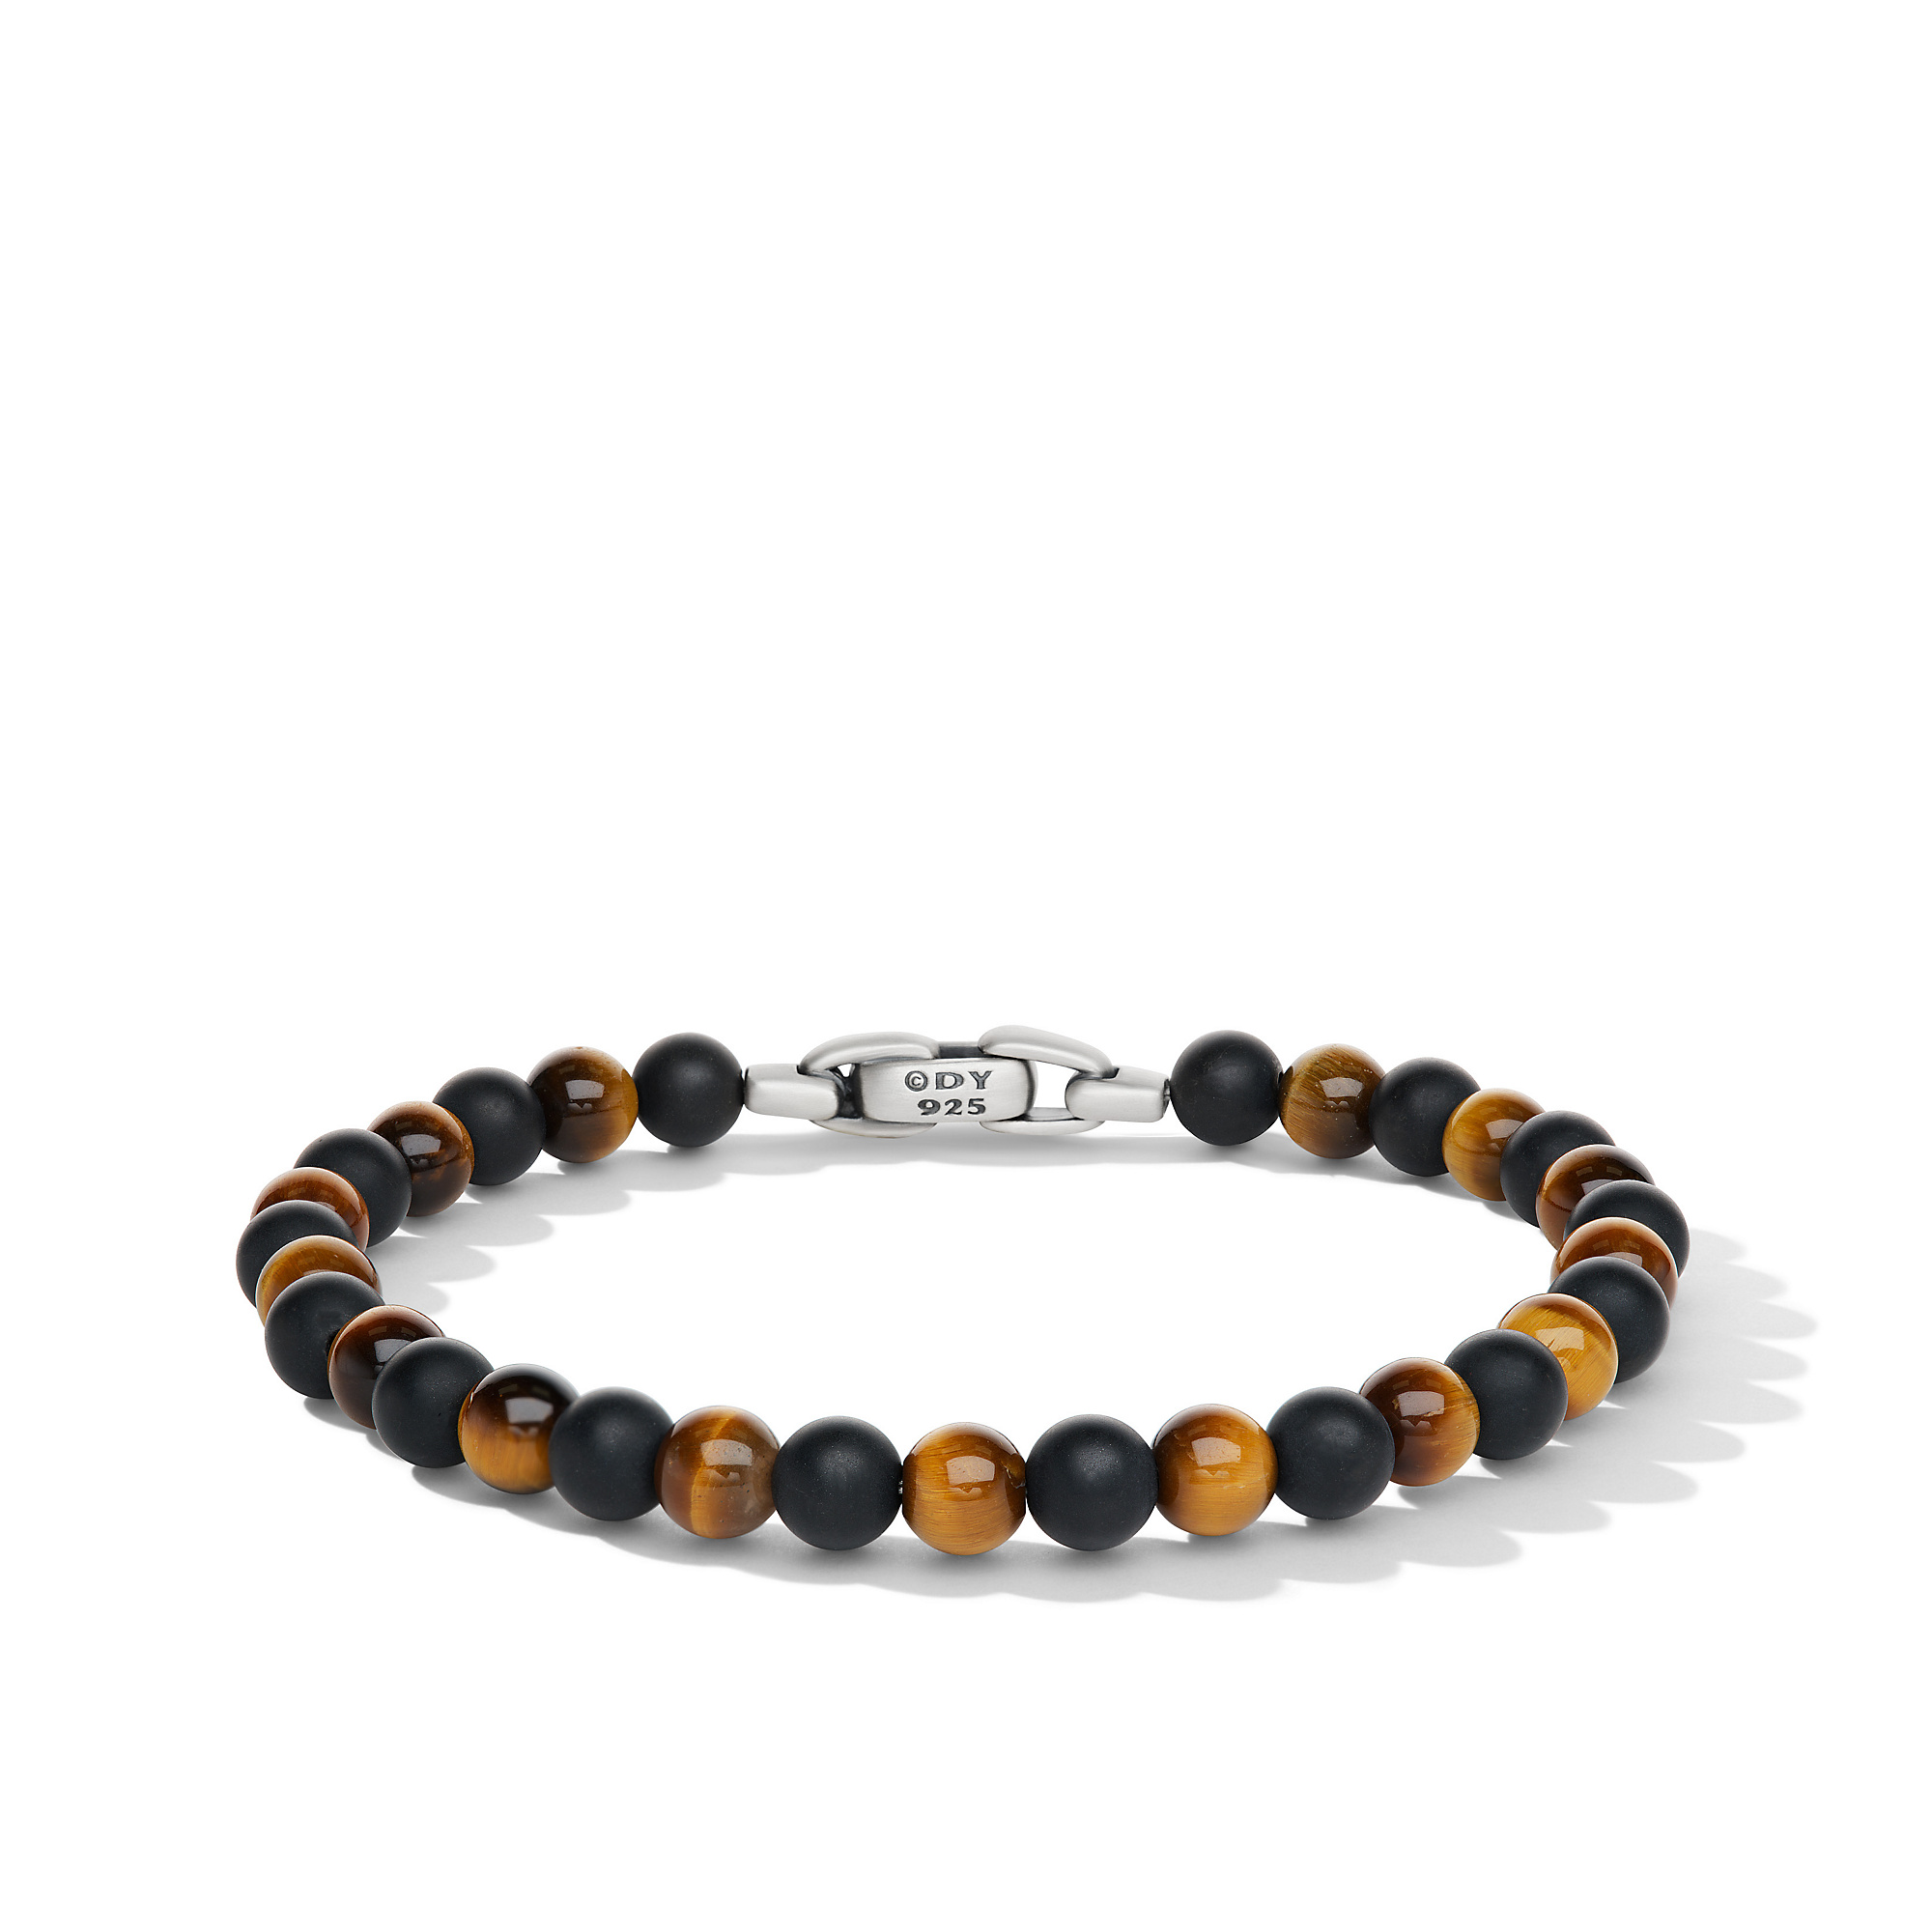 Spiritual Beads Alternating Bracelet in Sterling Silver with Black Onyx and Tiger's Eye